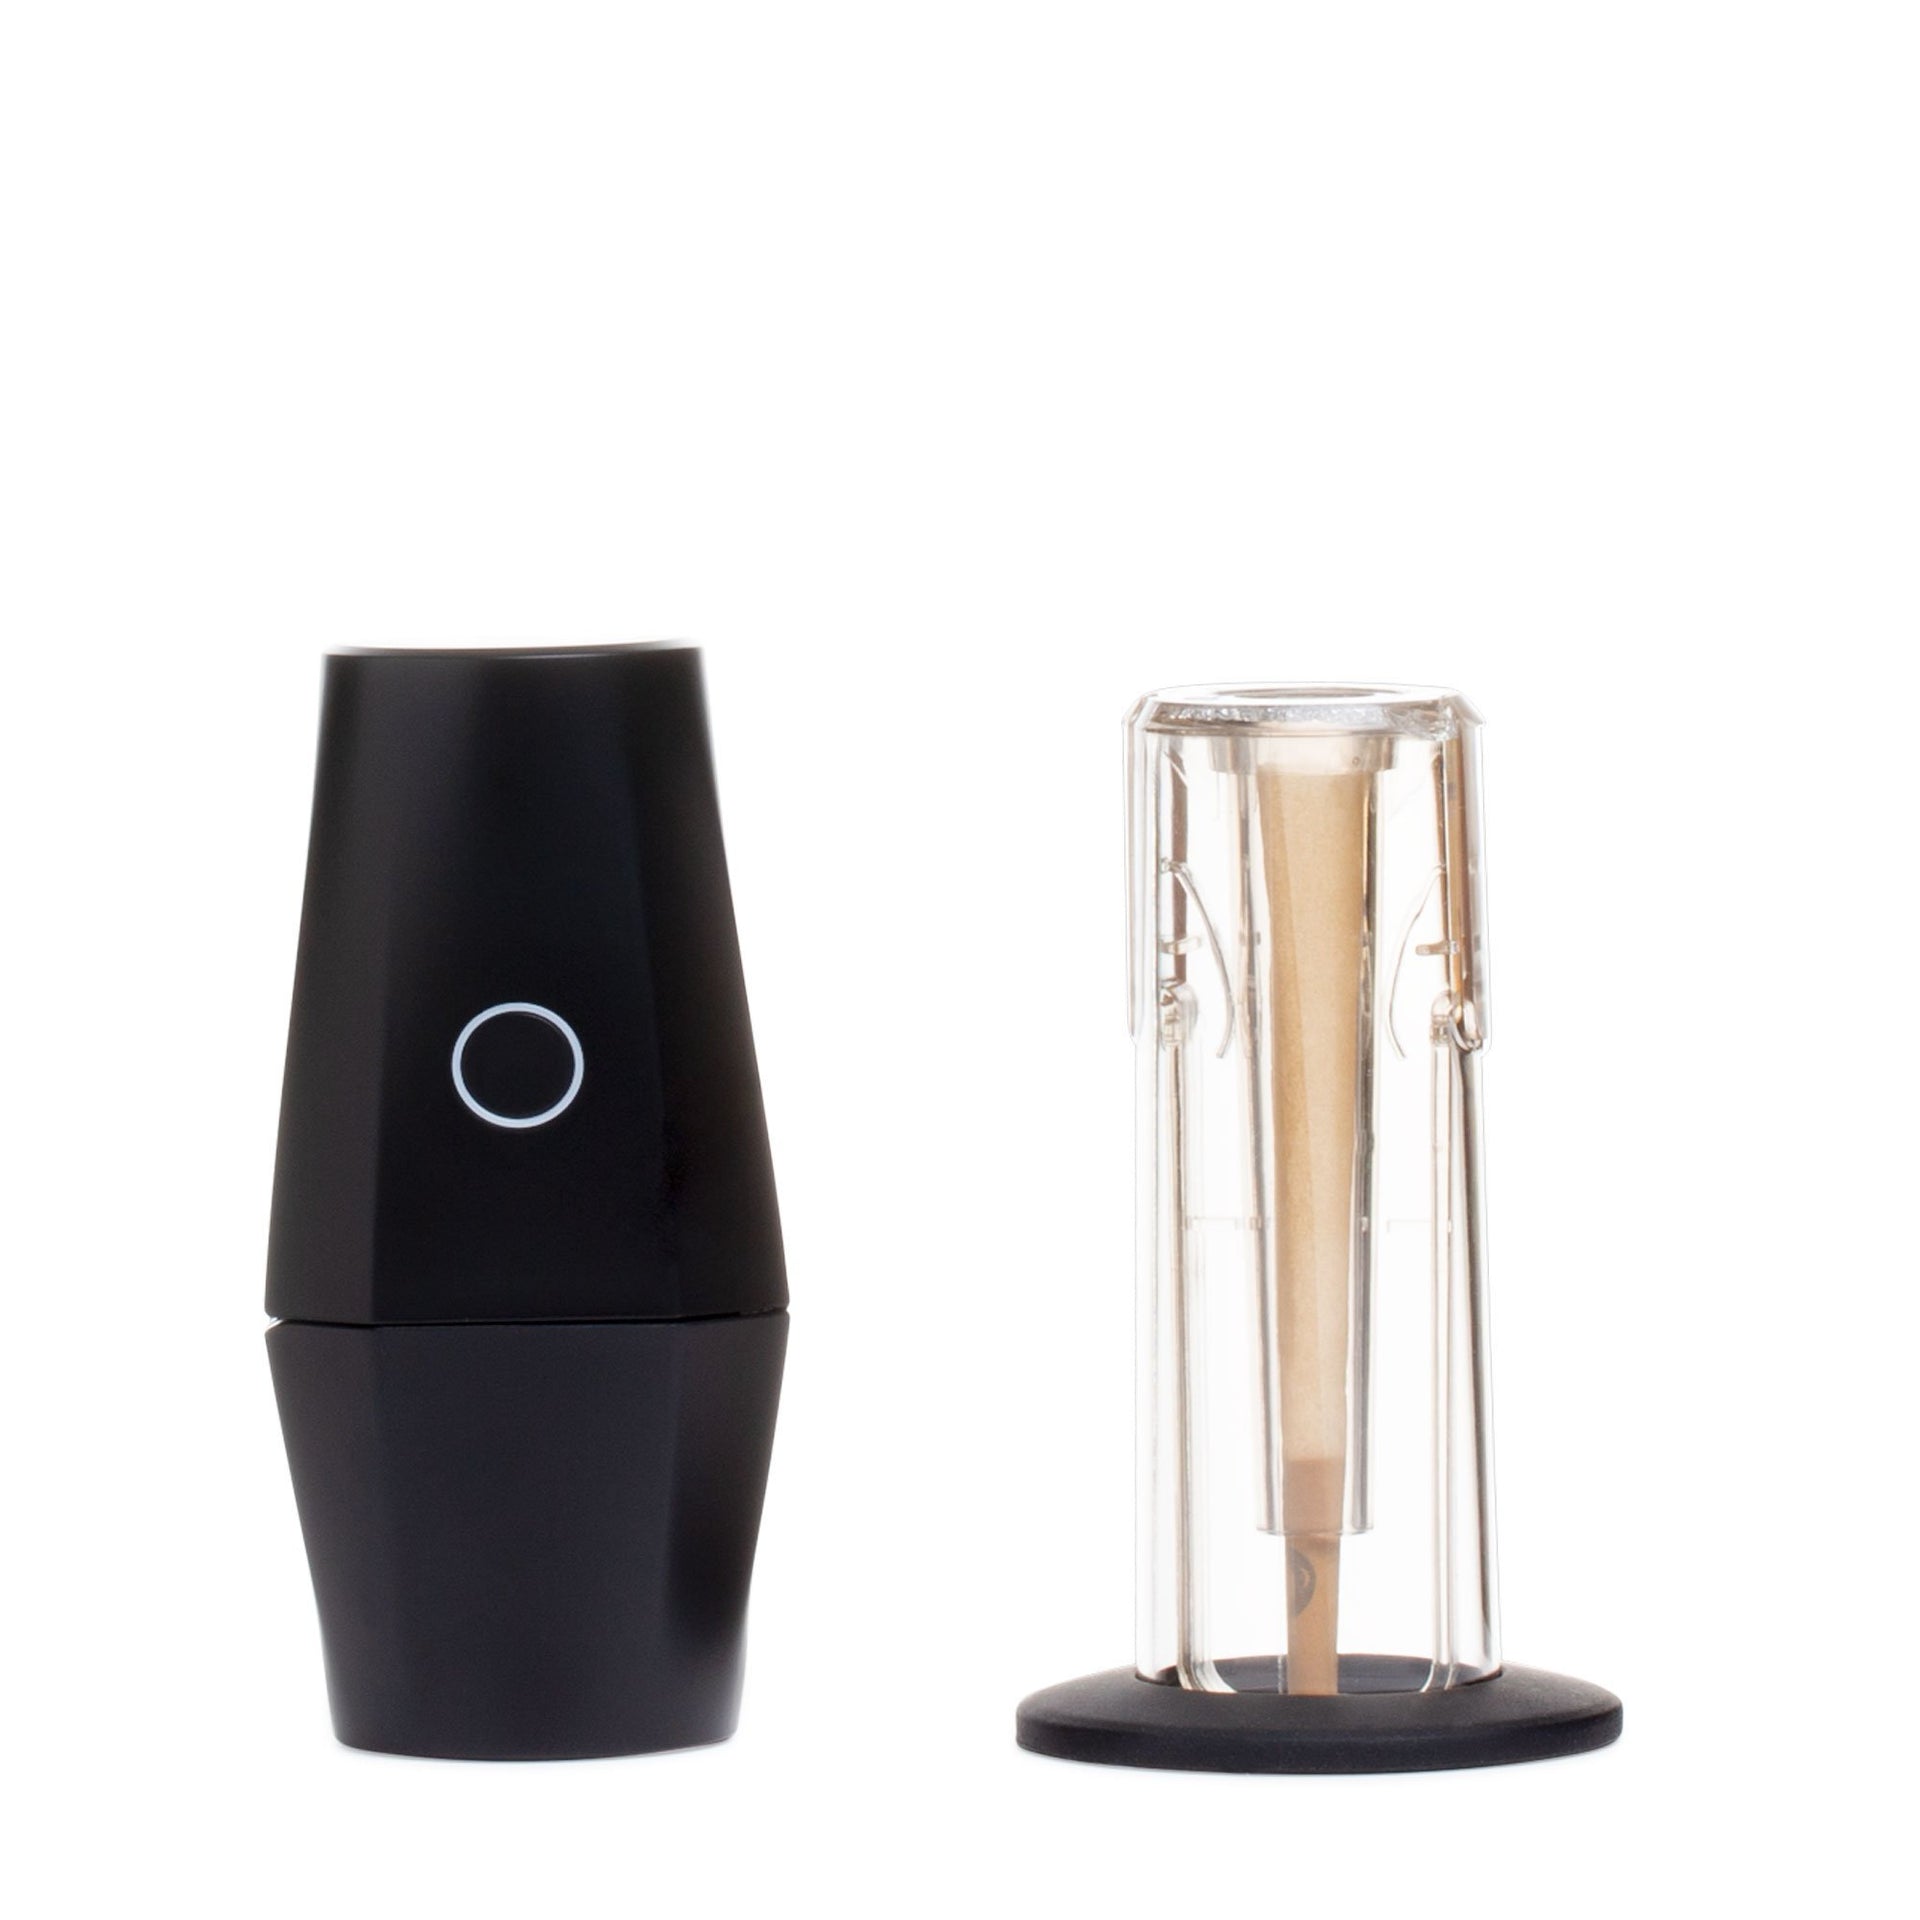 Electric Herb Grinder And Cone Filler